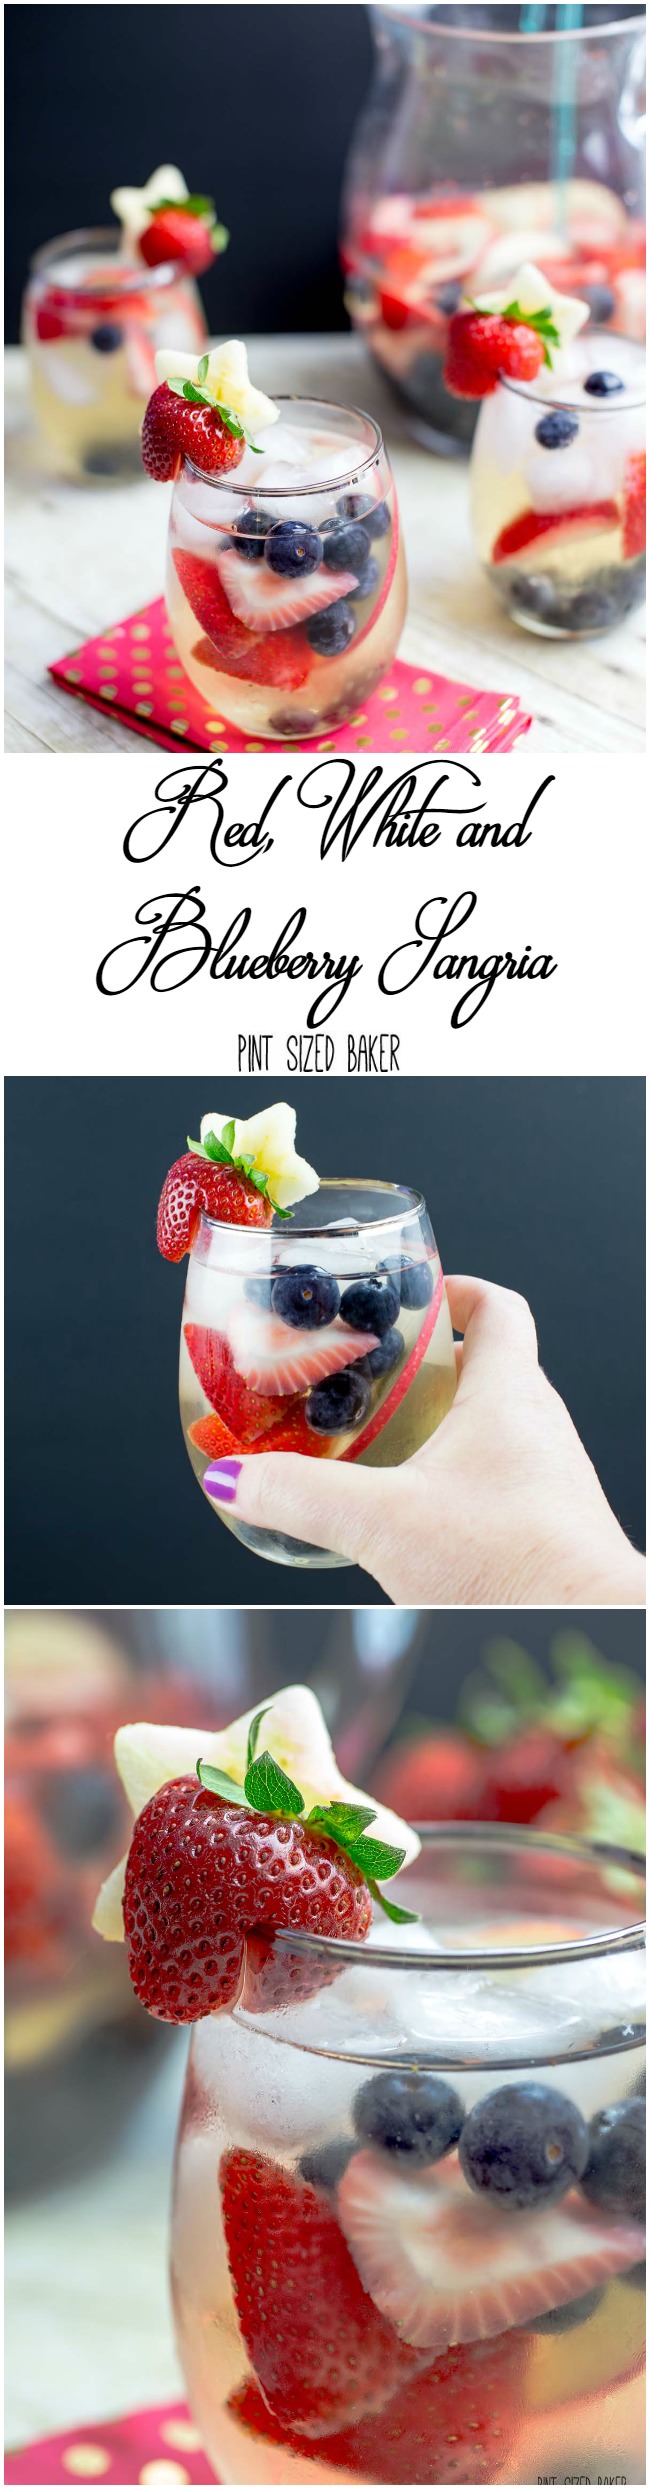 Summertime calls for a white wine Sangria. This Red, White and Blueberry Sangria Recipe serves a crowd. Fresh berries, white wine and some bubbly!